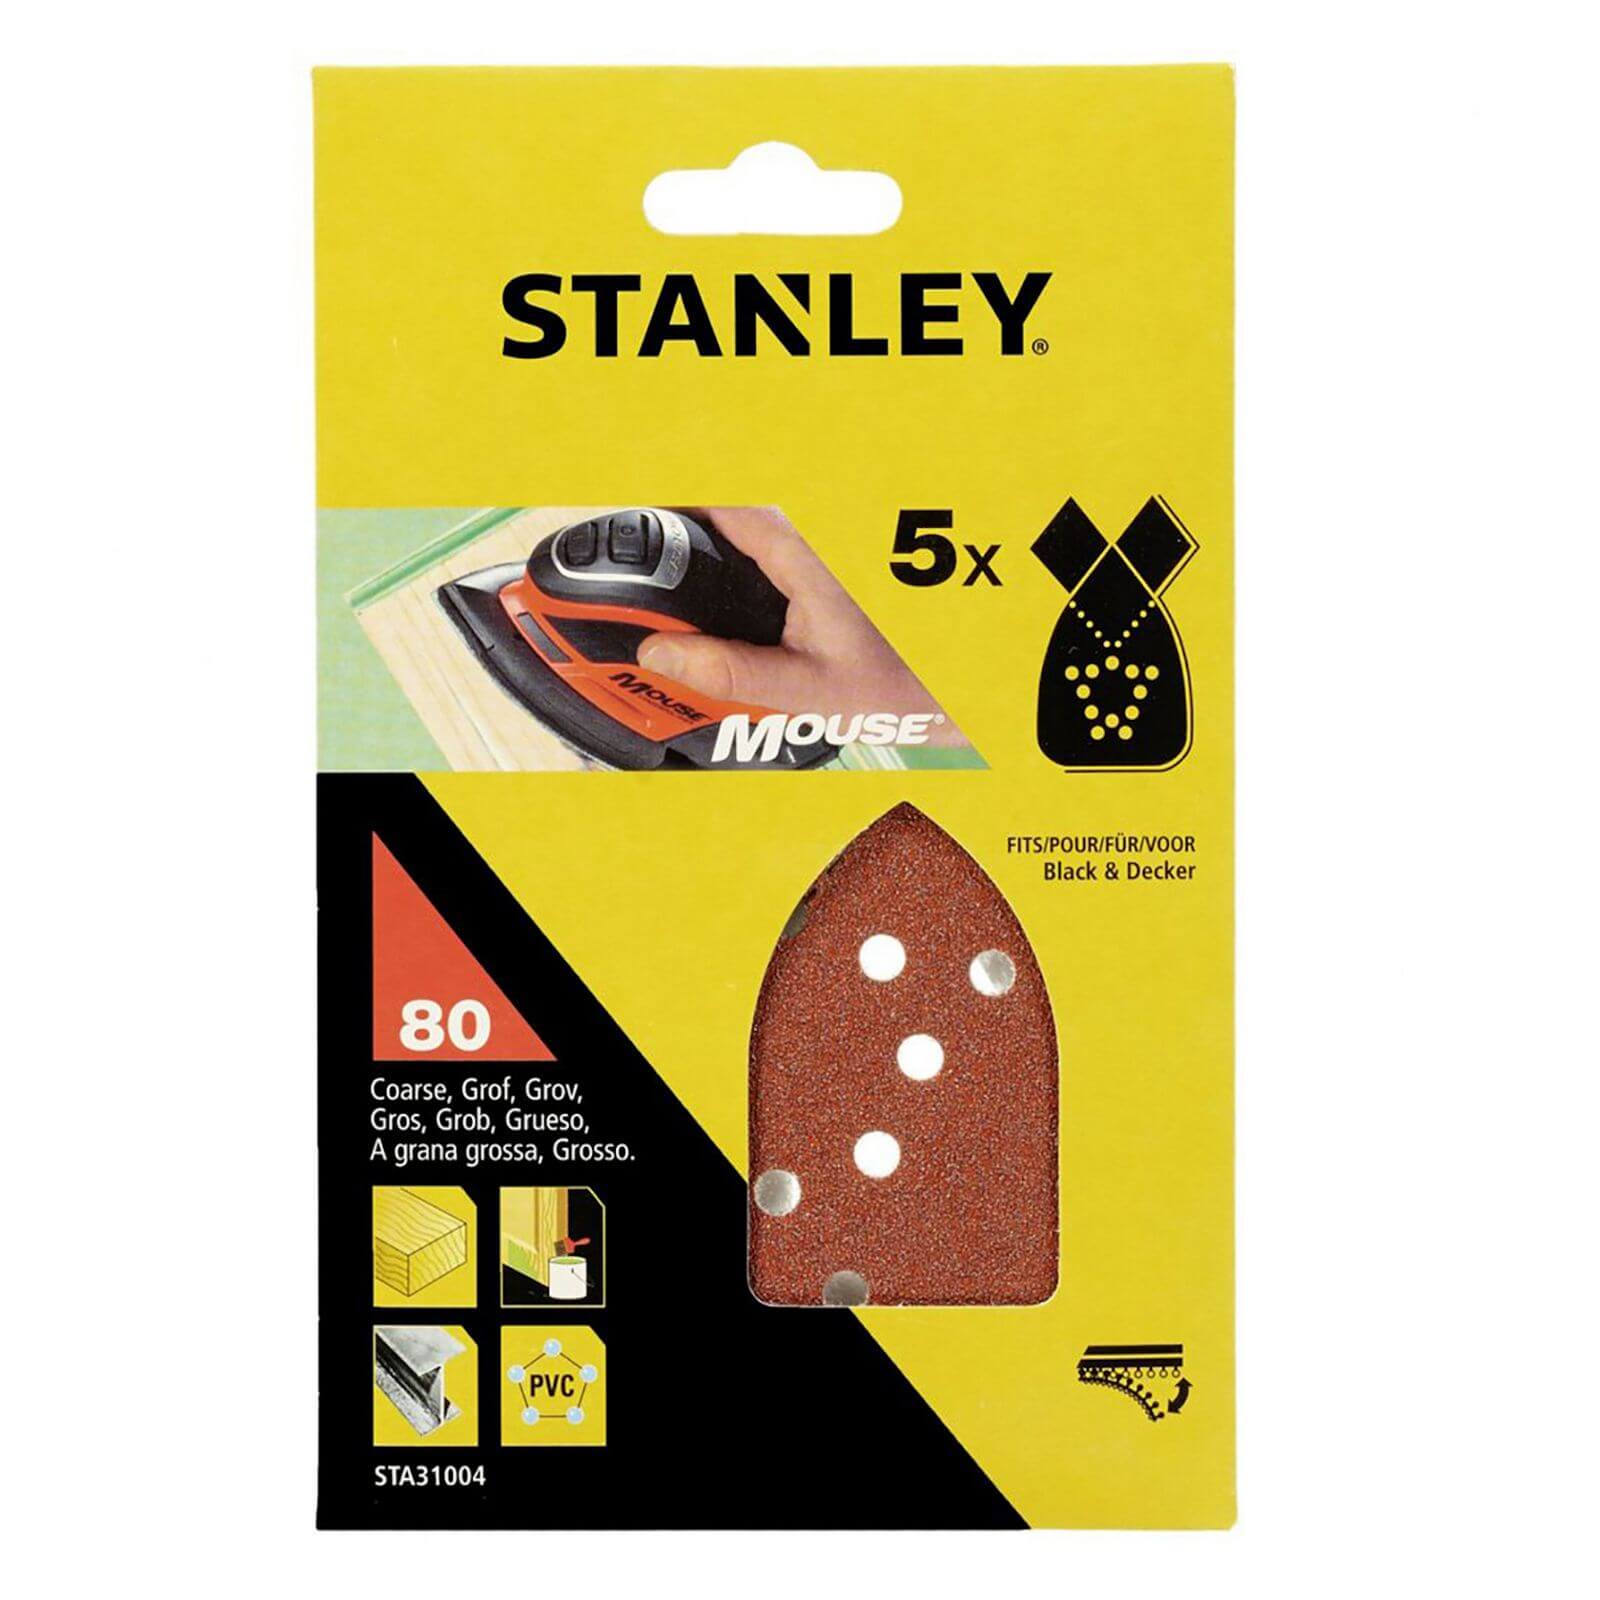 Photo of Stanley Mouse Sanding Sheets - 80g - Sta31004-xj